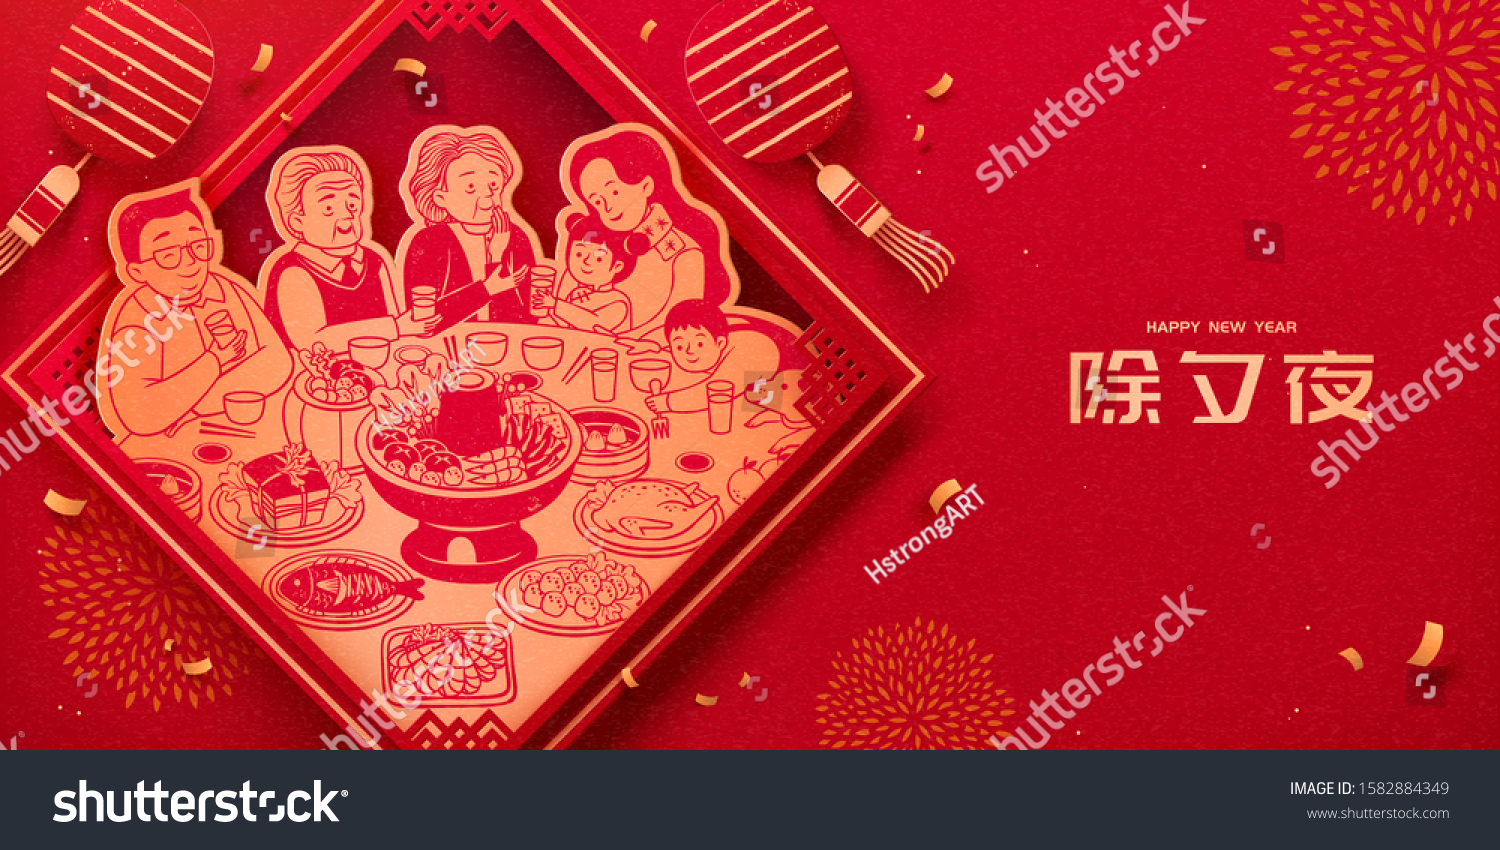 SVG of Extended family lively reunion dinner banner in gold and red with hanging lanterns background, Chinese text translation: spring and new year's eve svg